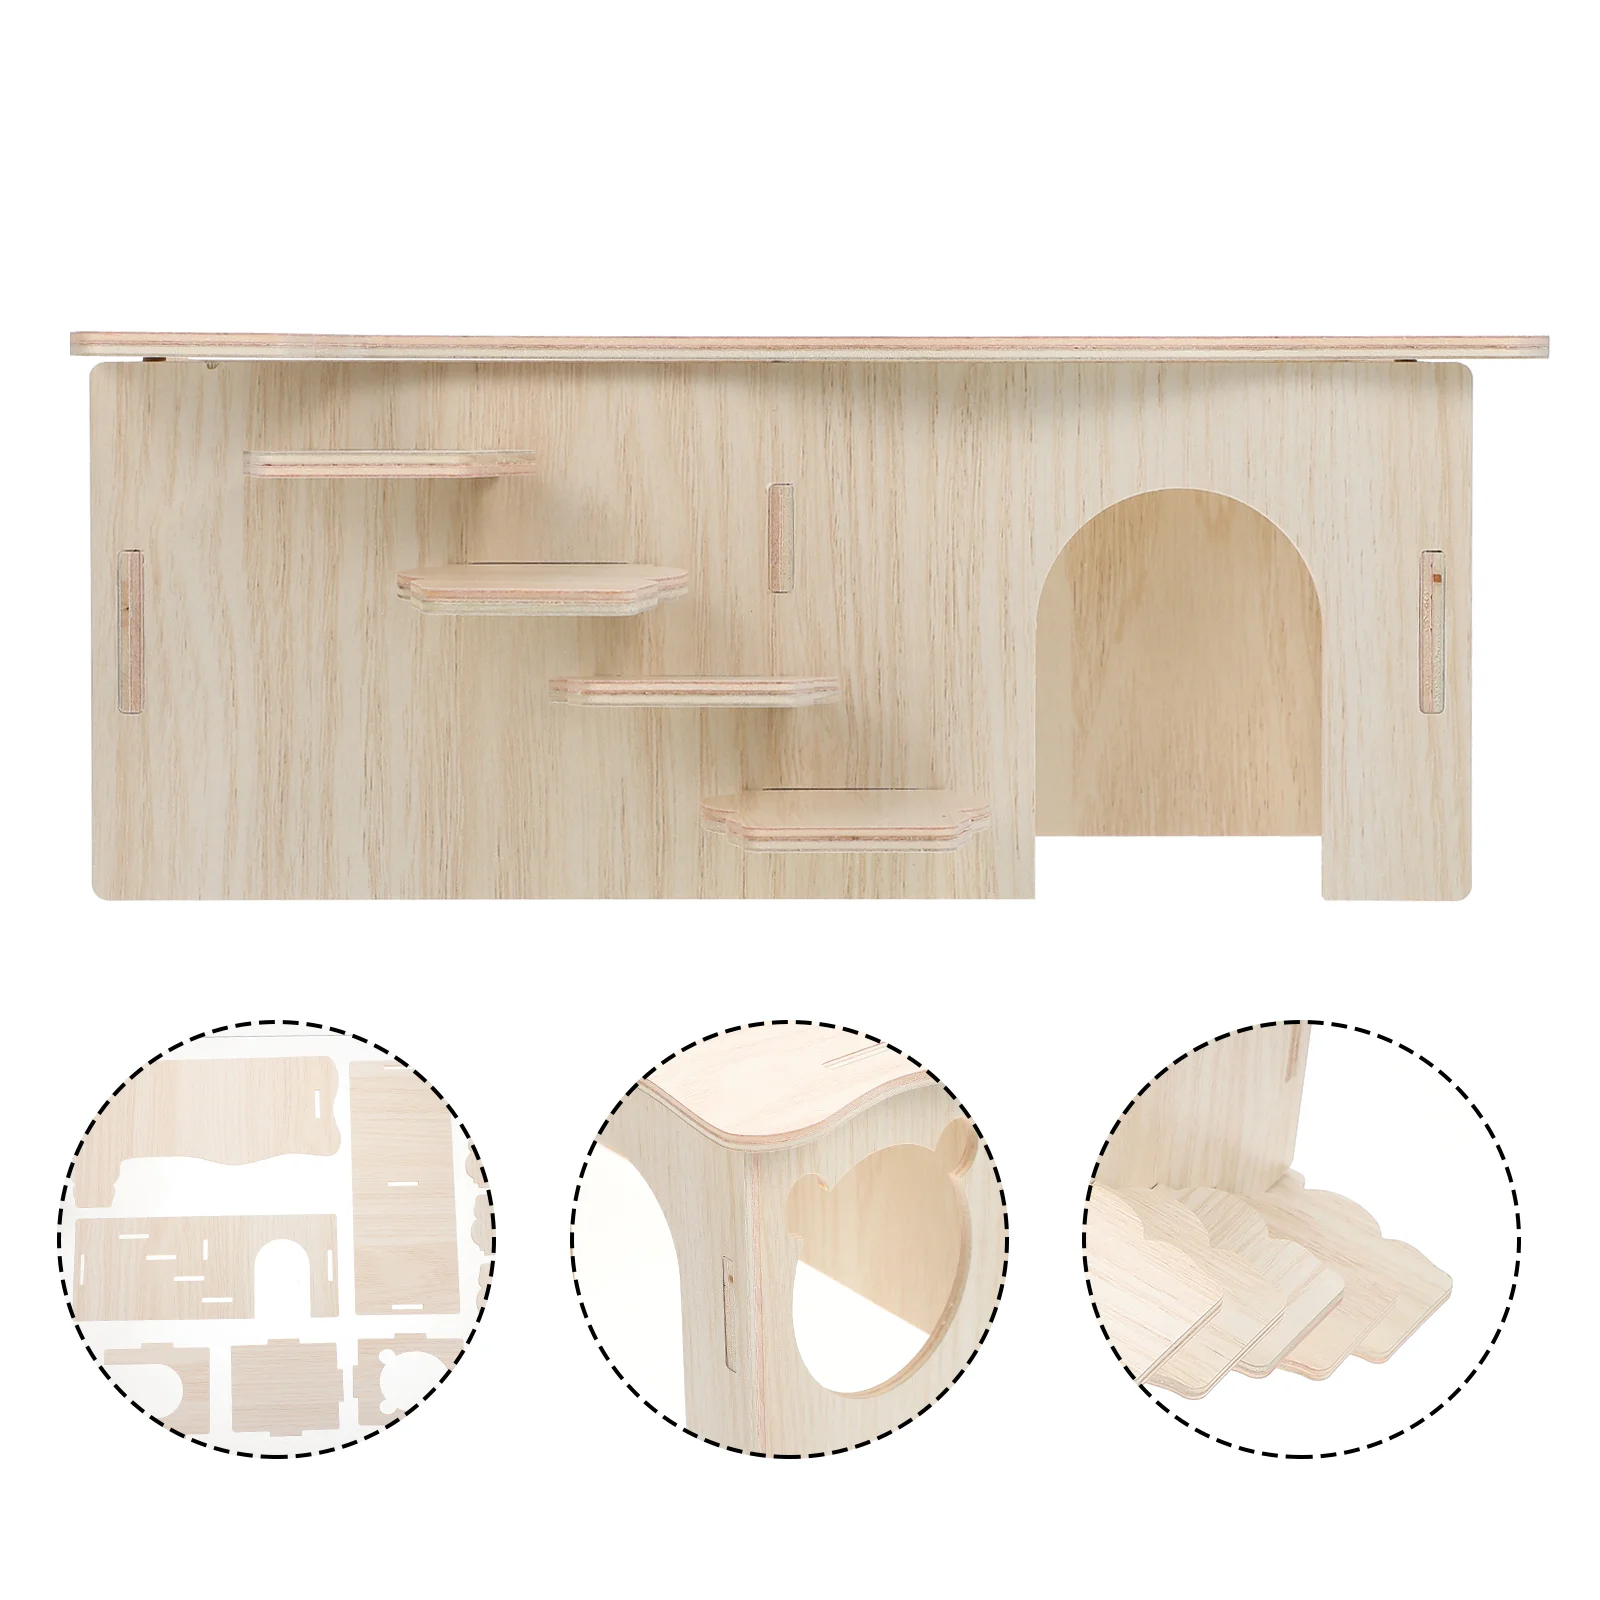 

Creative Hamster Hideout Wooden Hamster Hiding Place Hamster Sleeping Nest Wooden House Toys Pet Guinea Pig Squirrel Hideout